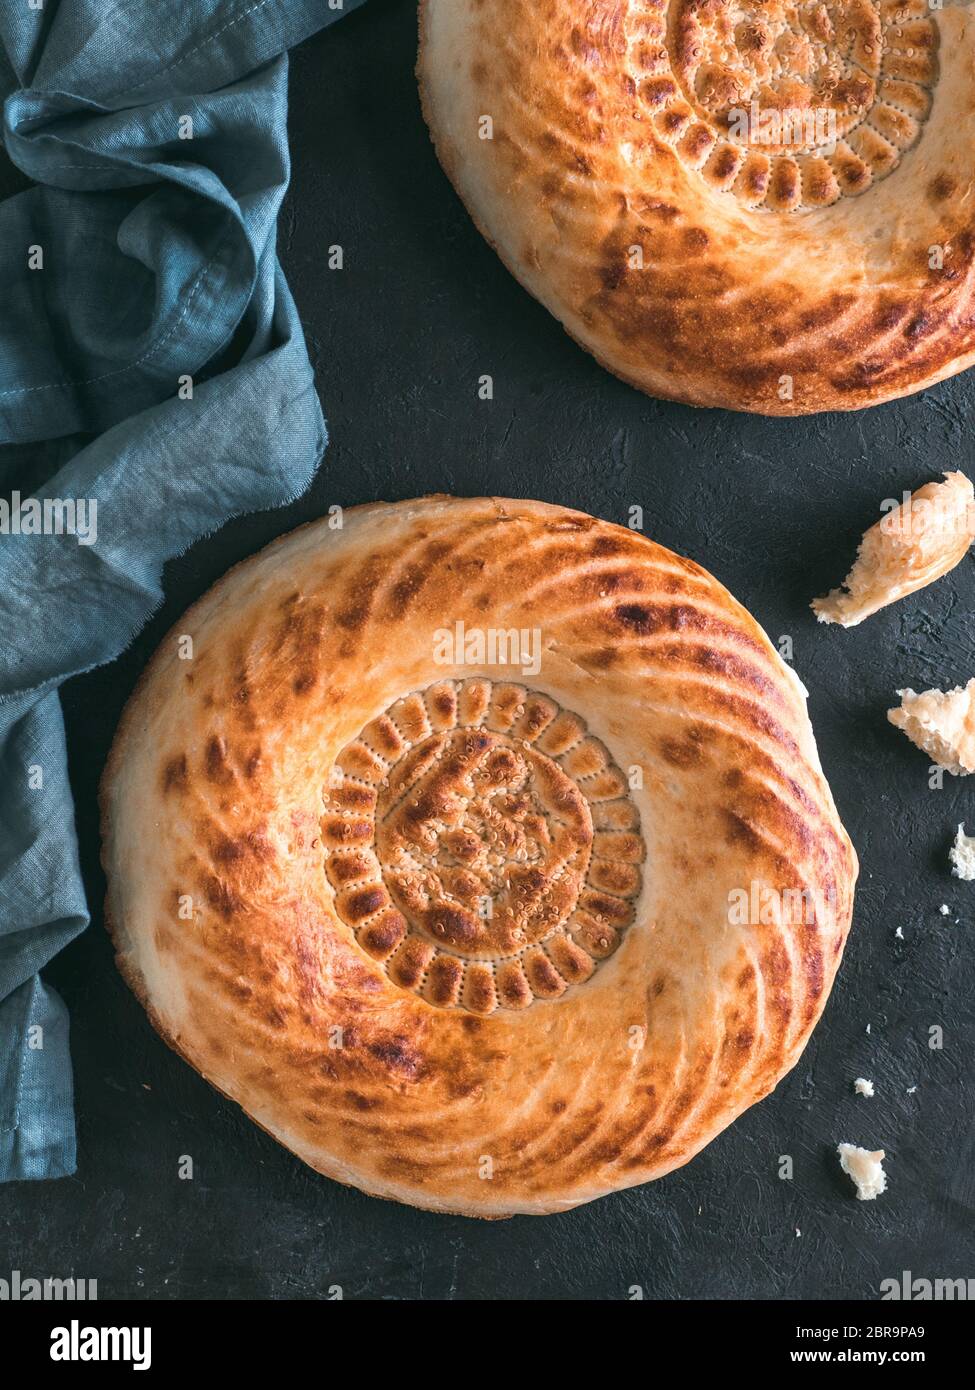 Tasty fresh tandoor bread on black table. Two tandoor flat bread cake with pieces and crumbs on dark stone background. National asian meal and food. C Stock Photo